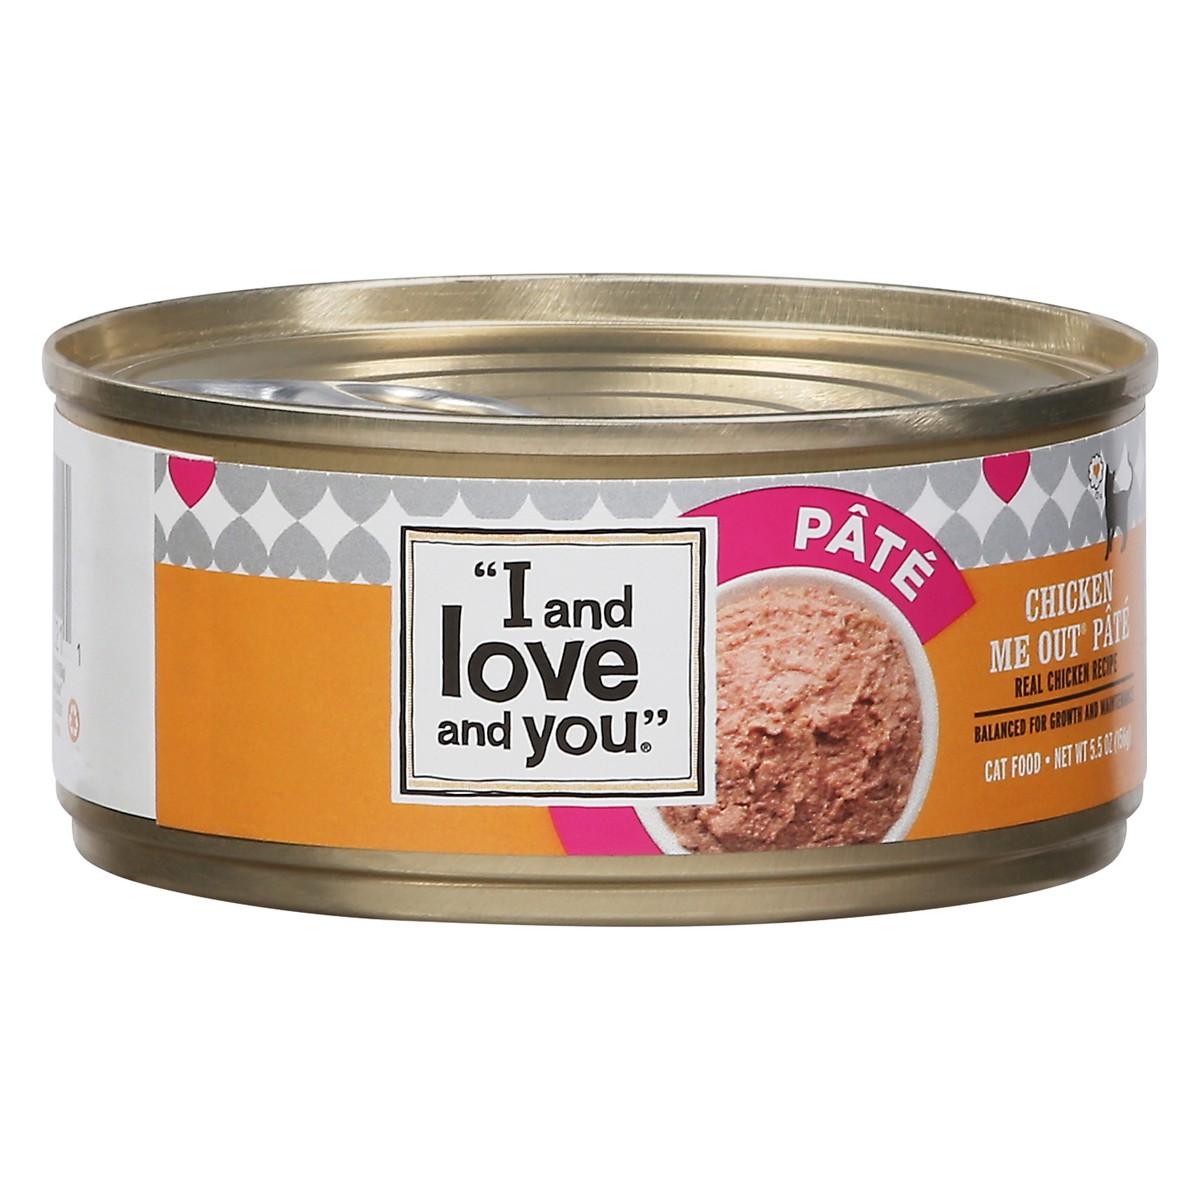 slide 14 of 15, I and Love and You Chicken Me Out Pate Cat Food 5.5 oz, 5.5 oz